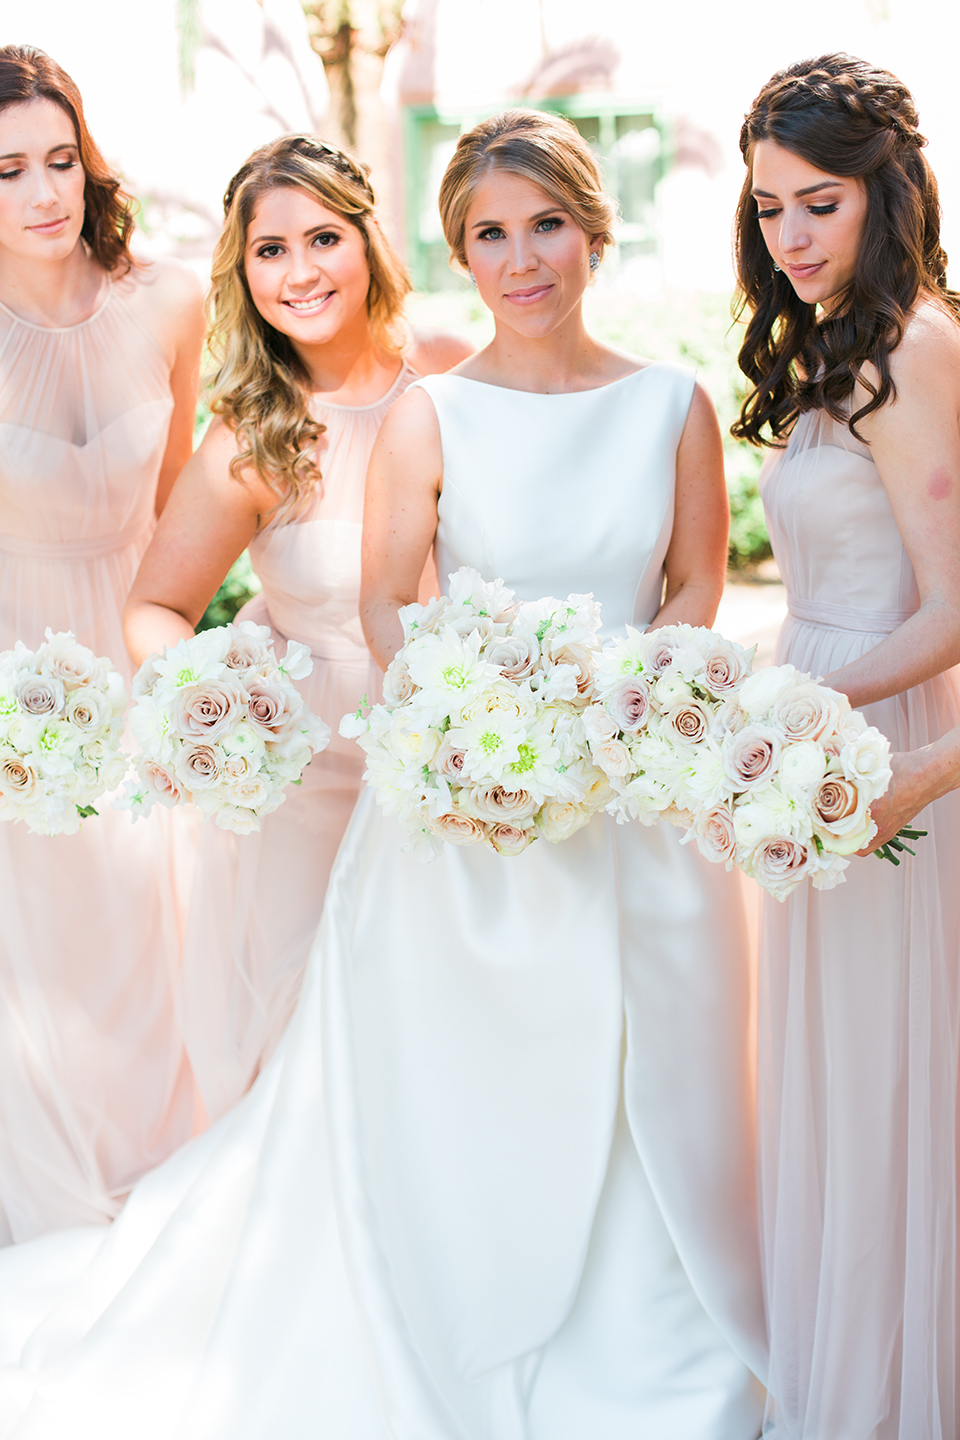 Bride with her bridesmaids at The Vinoy in St. Pete, Florida | Debra Eby Photography Co.